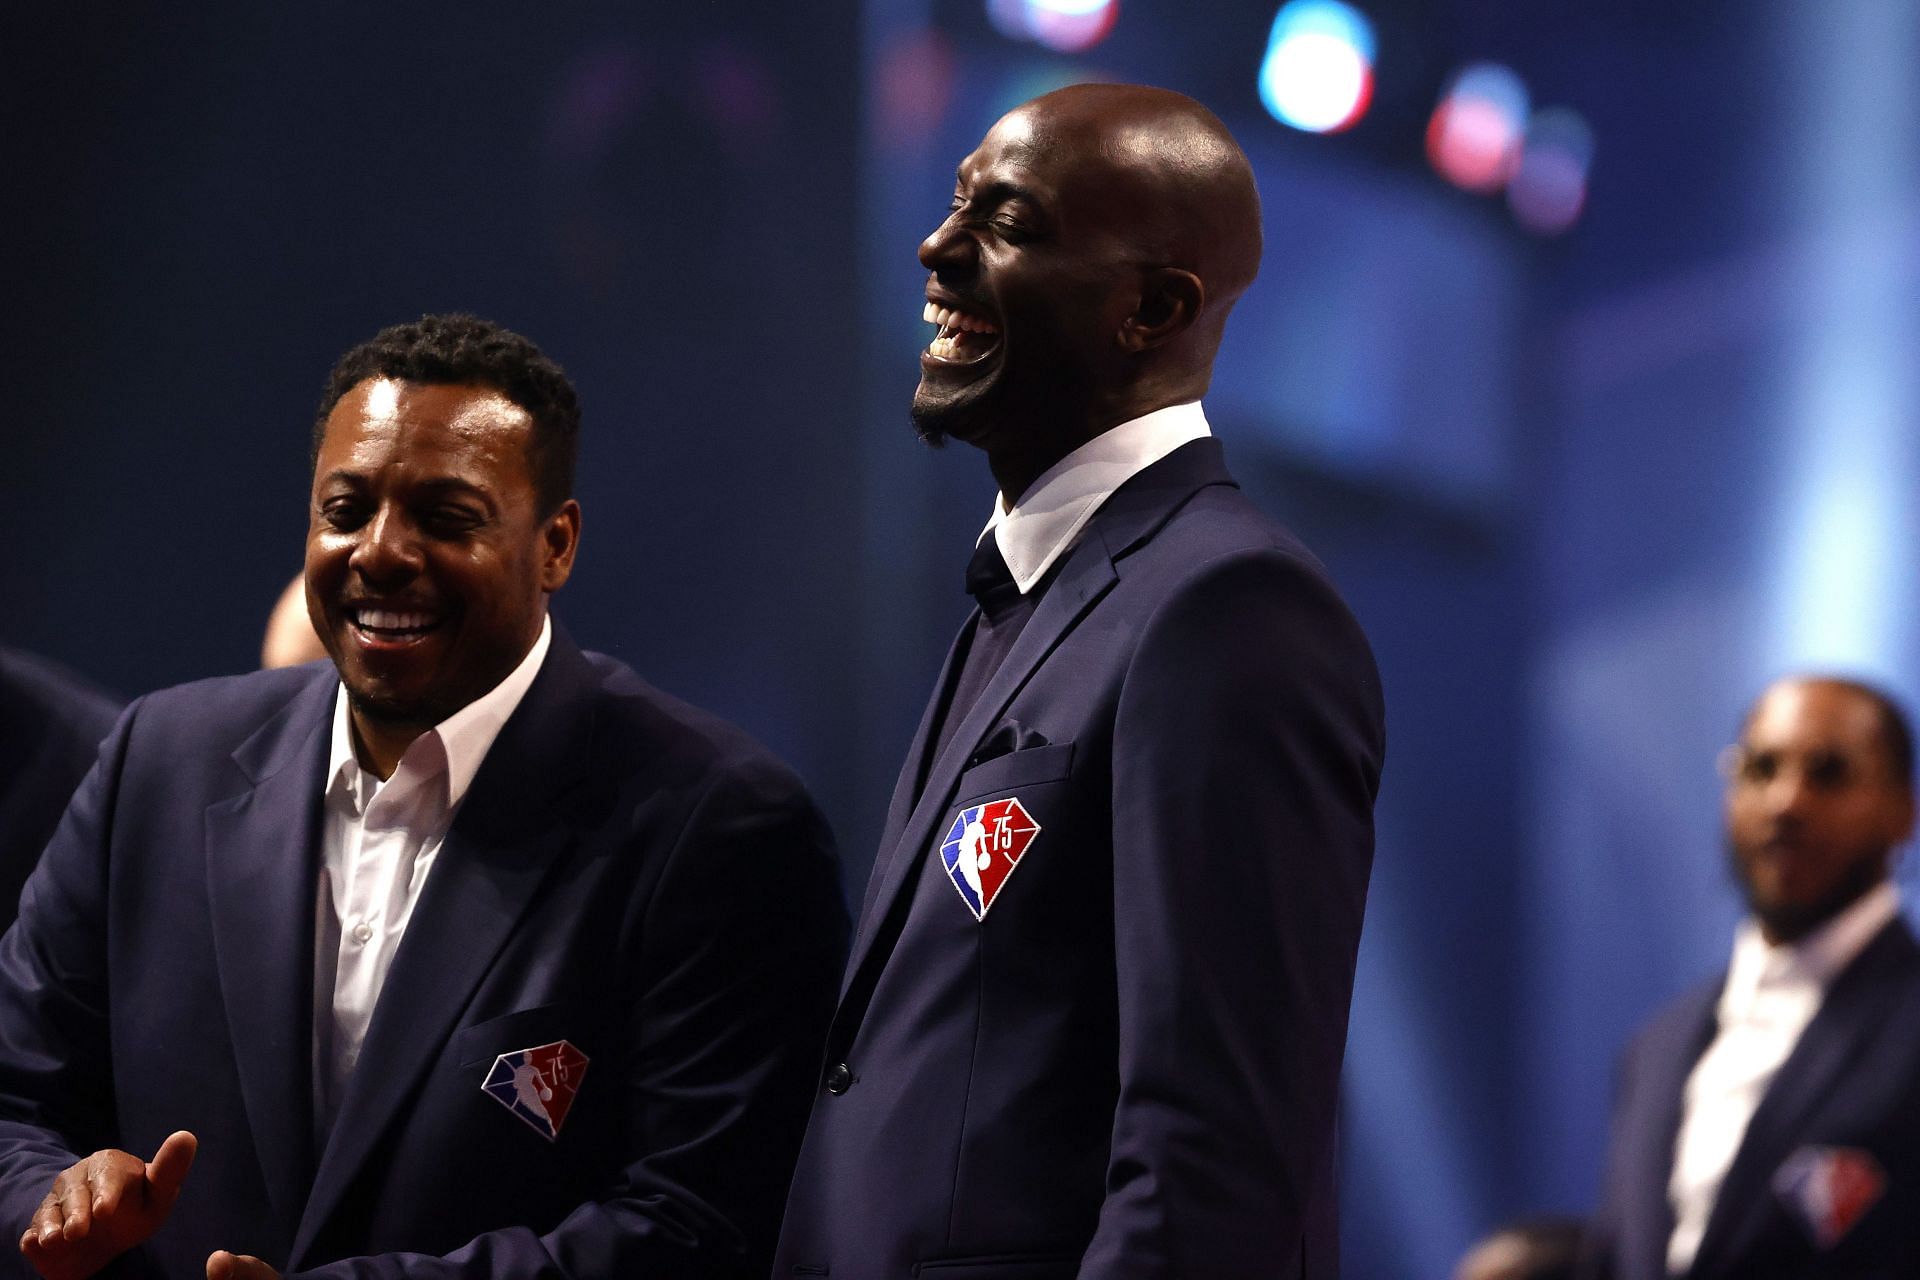 Kevin Garnett (right) with Paul Pierce (left) at the 2022 NBA All-Star Game